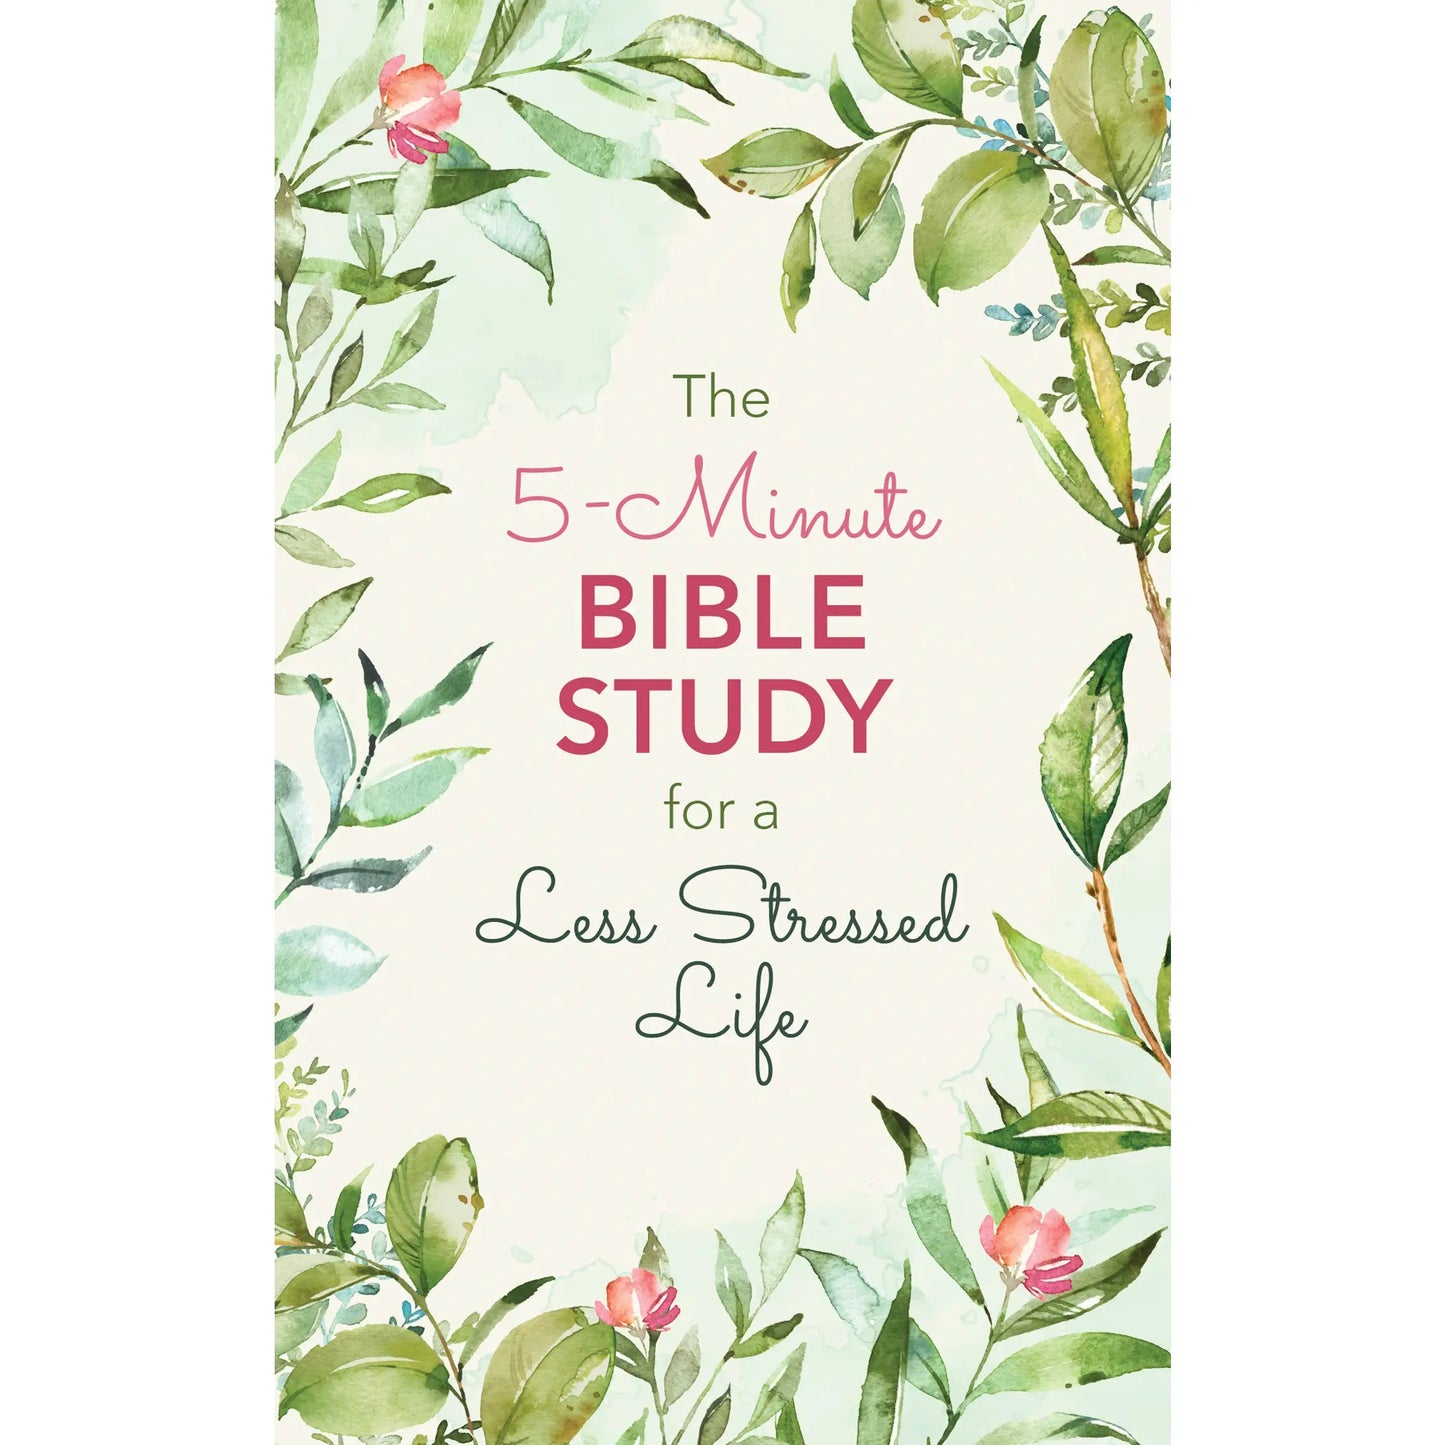 The 5-Minute Bible Study